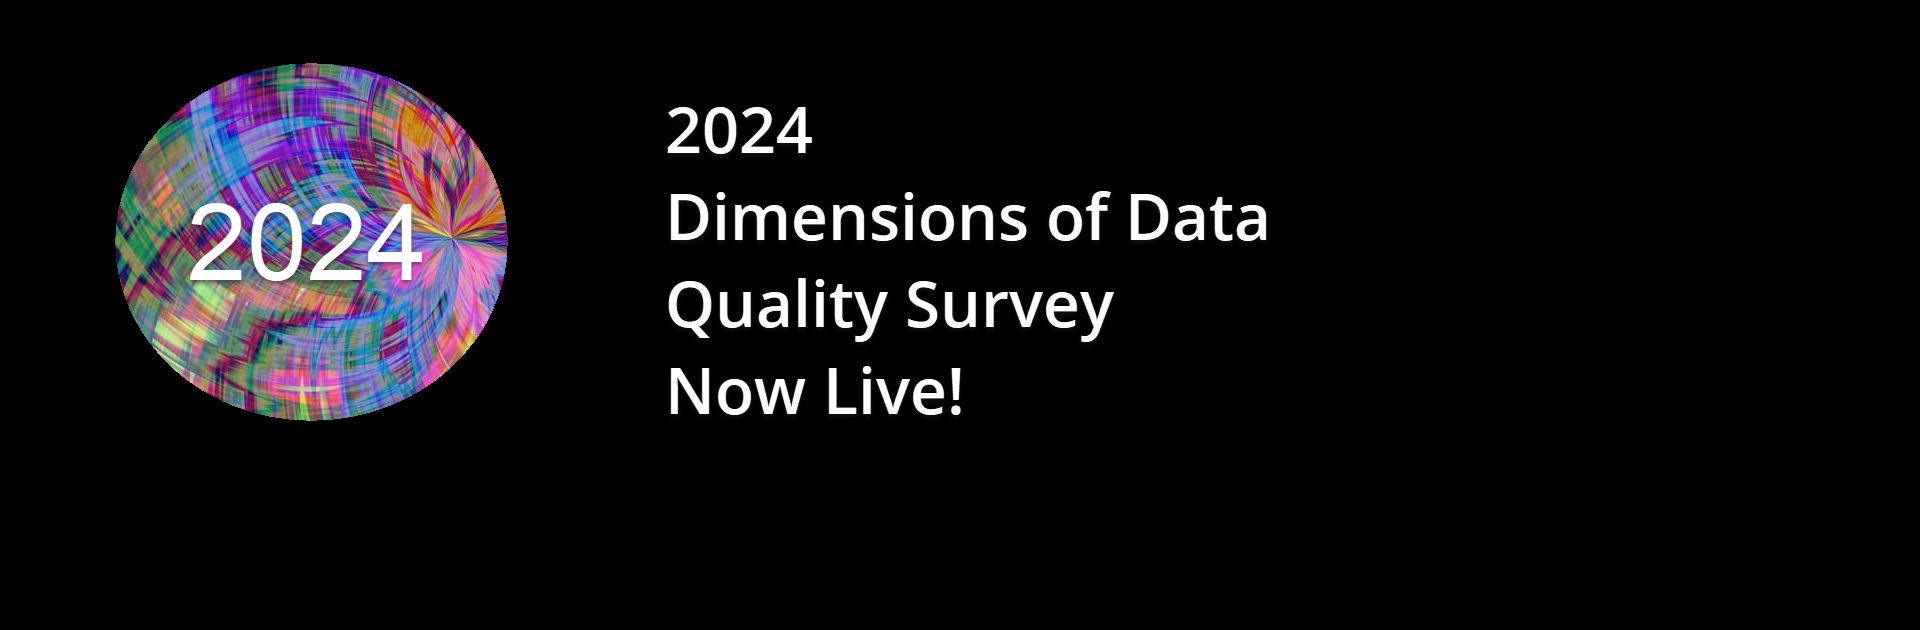 2024 Dimensions of Data Quality Survey